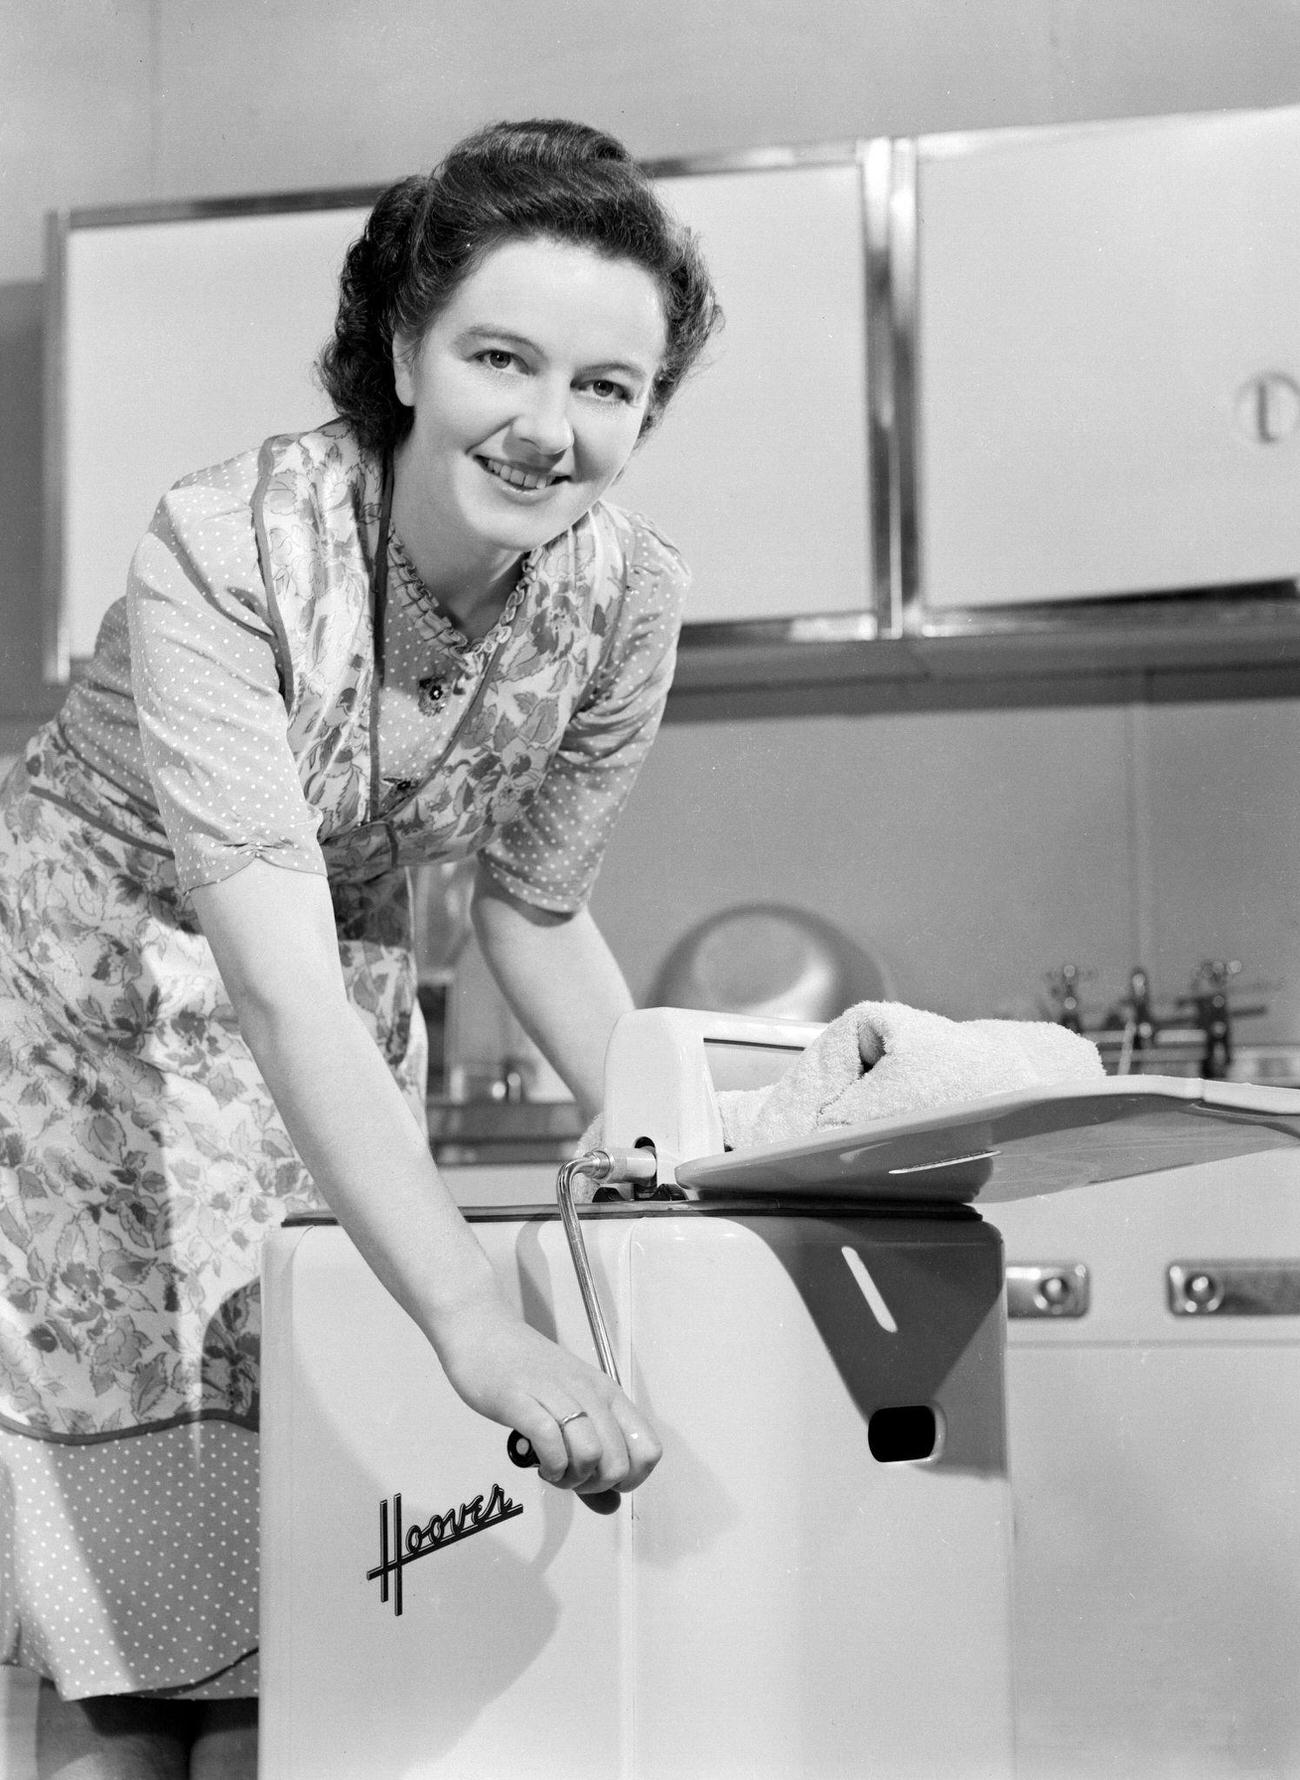 Woman operating a Hoover washing machine and wringer, UK, 1948.